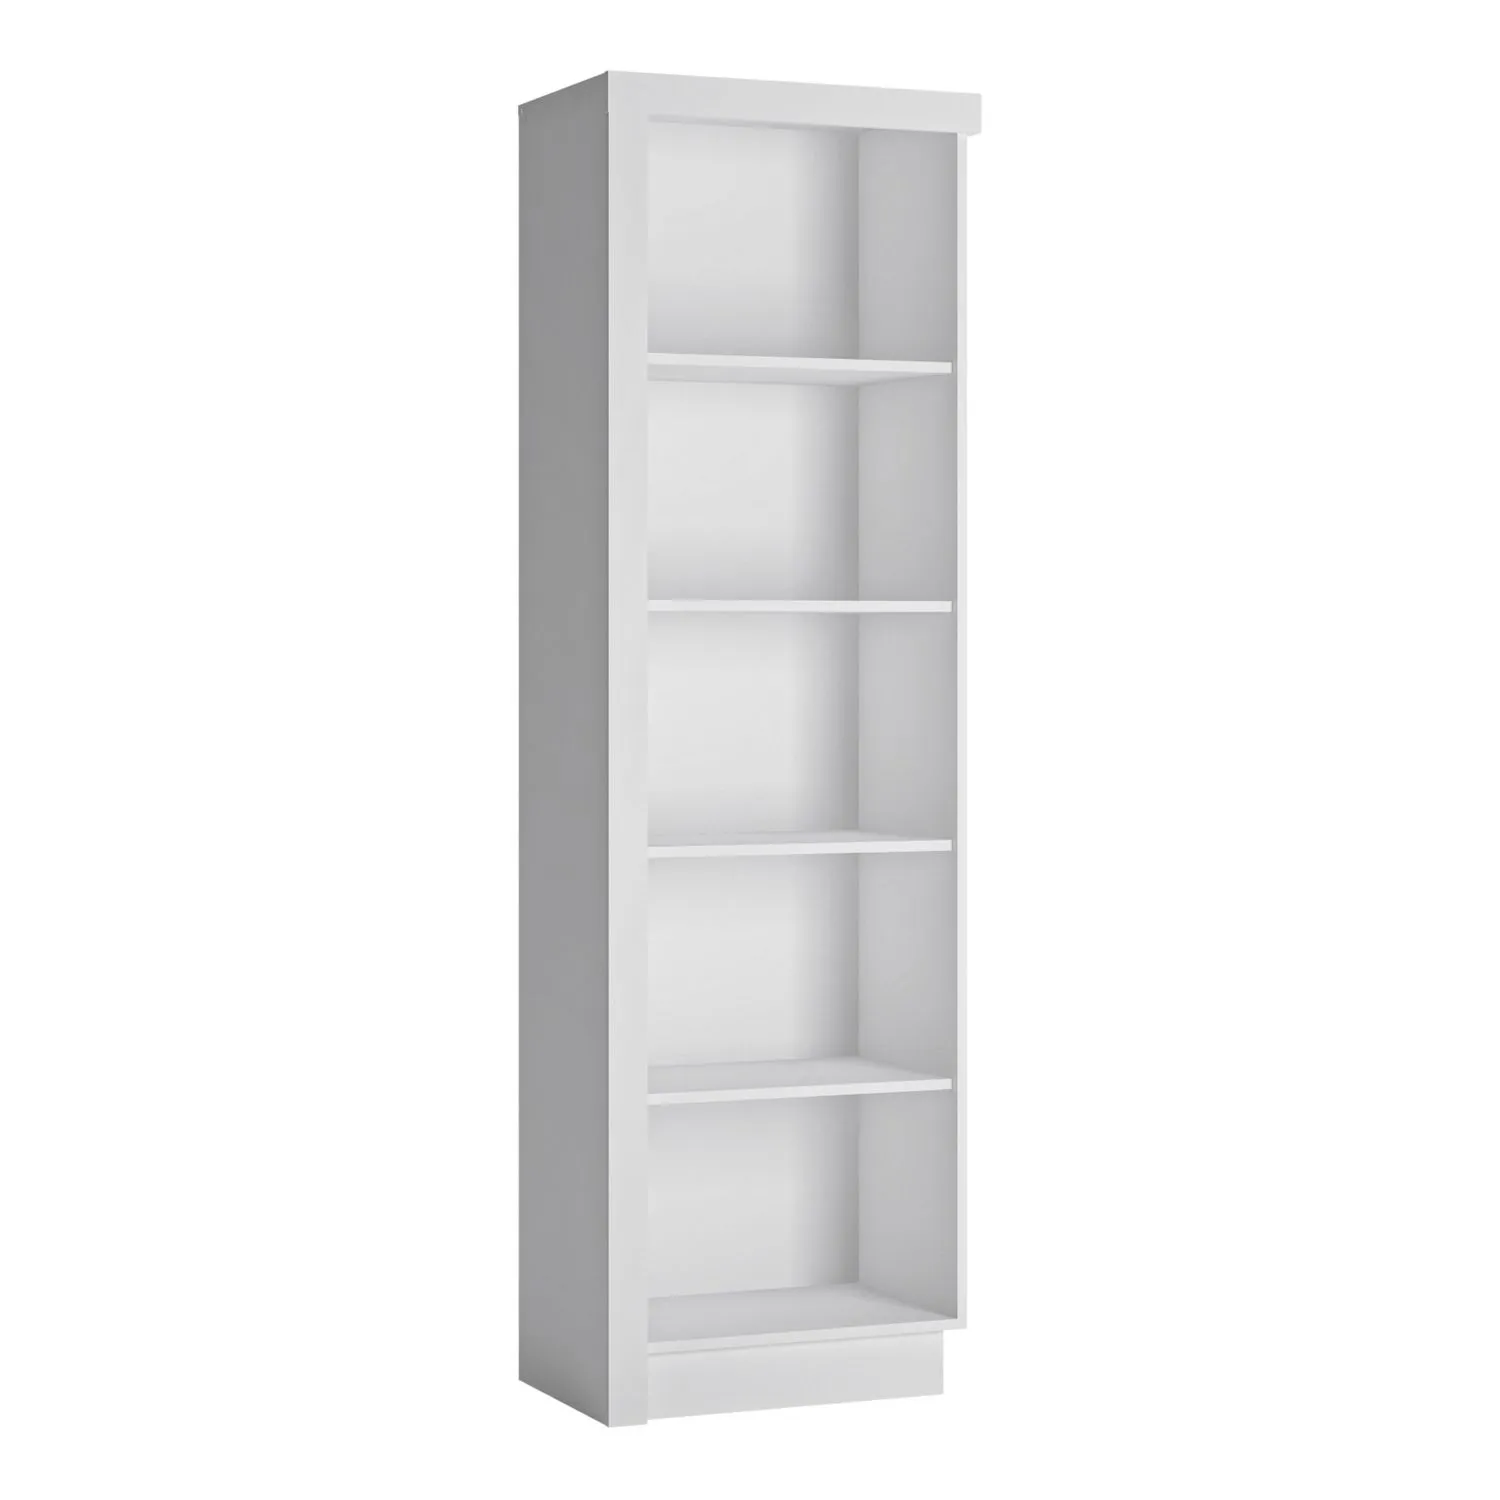 White and High Gloss Narrow Tall Bookcase (RH)